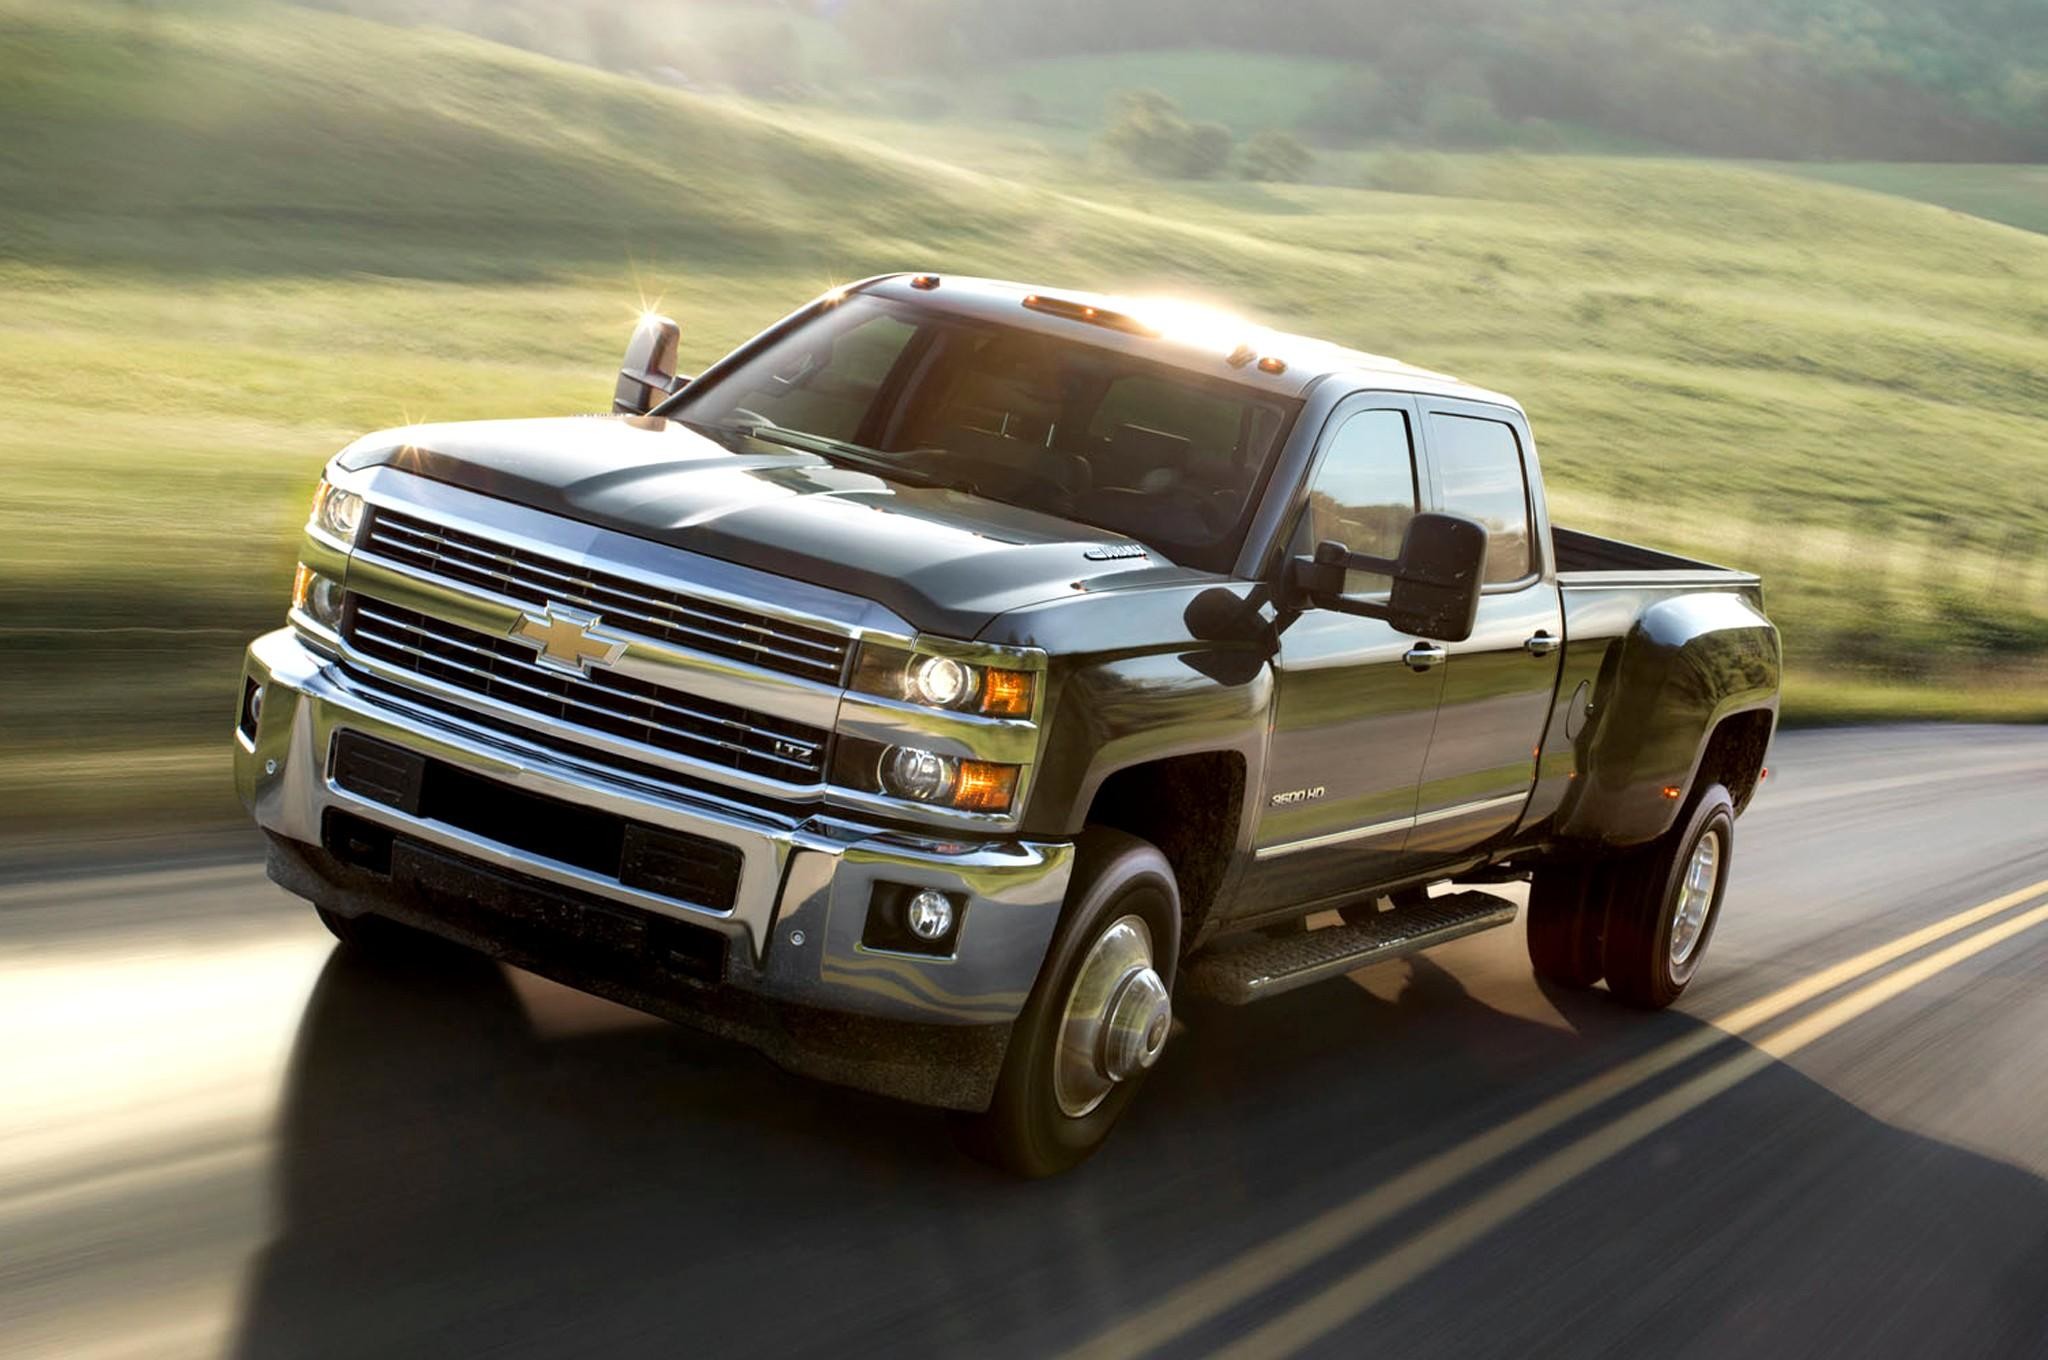 2048x1360 Chevrolet Silverado wallpapers for android